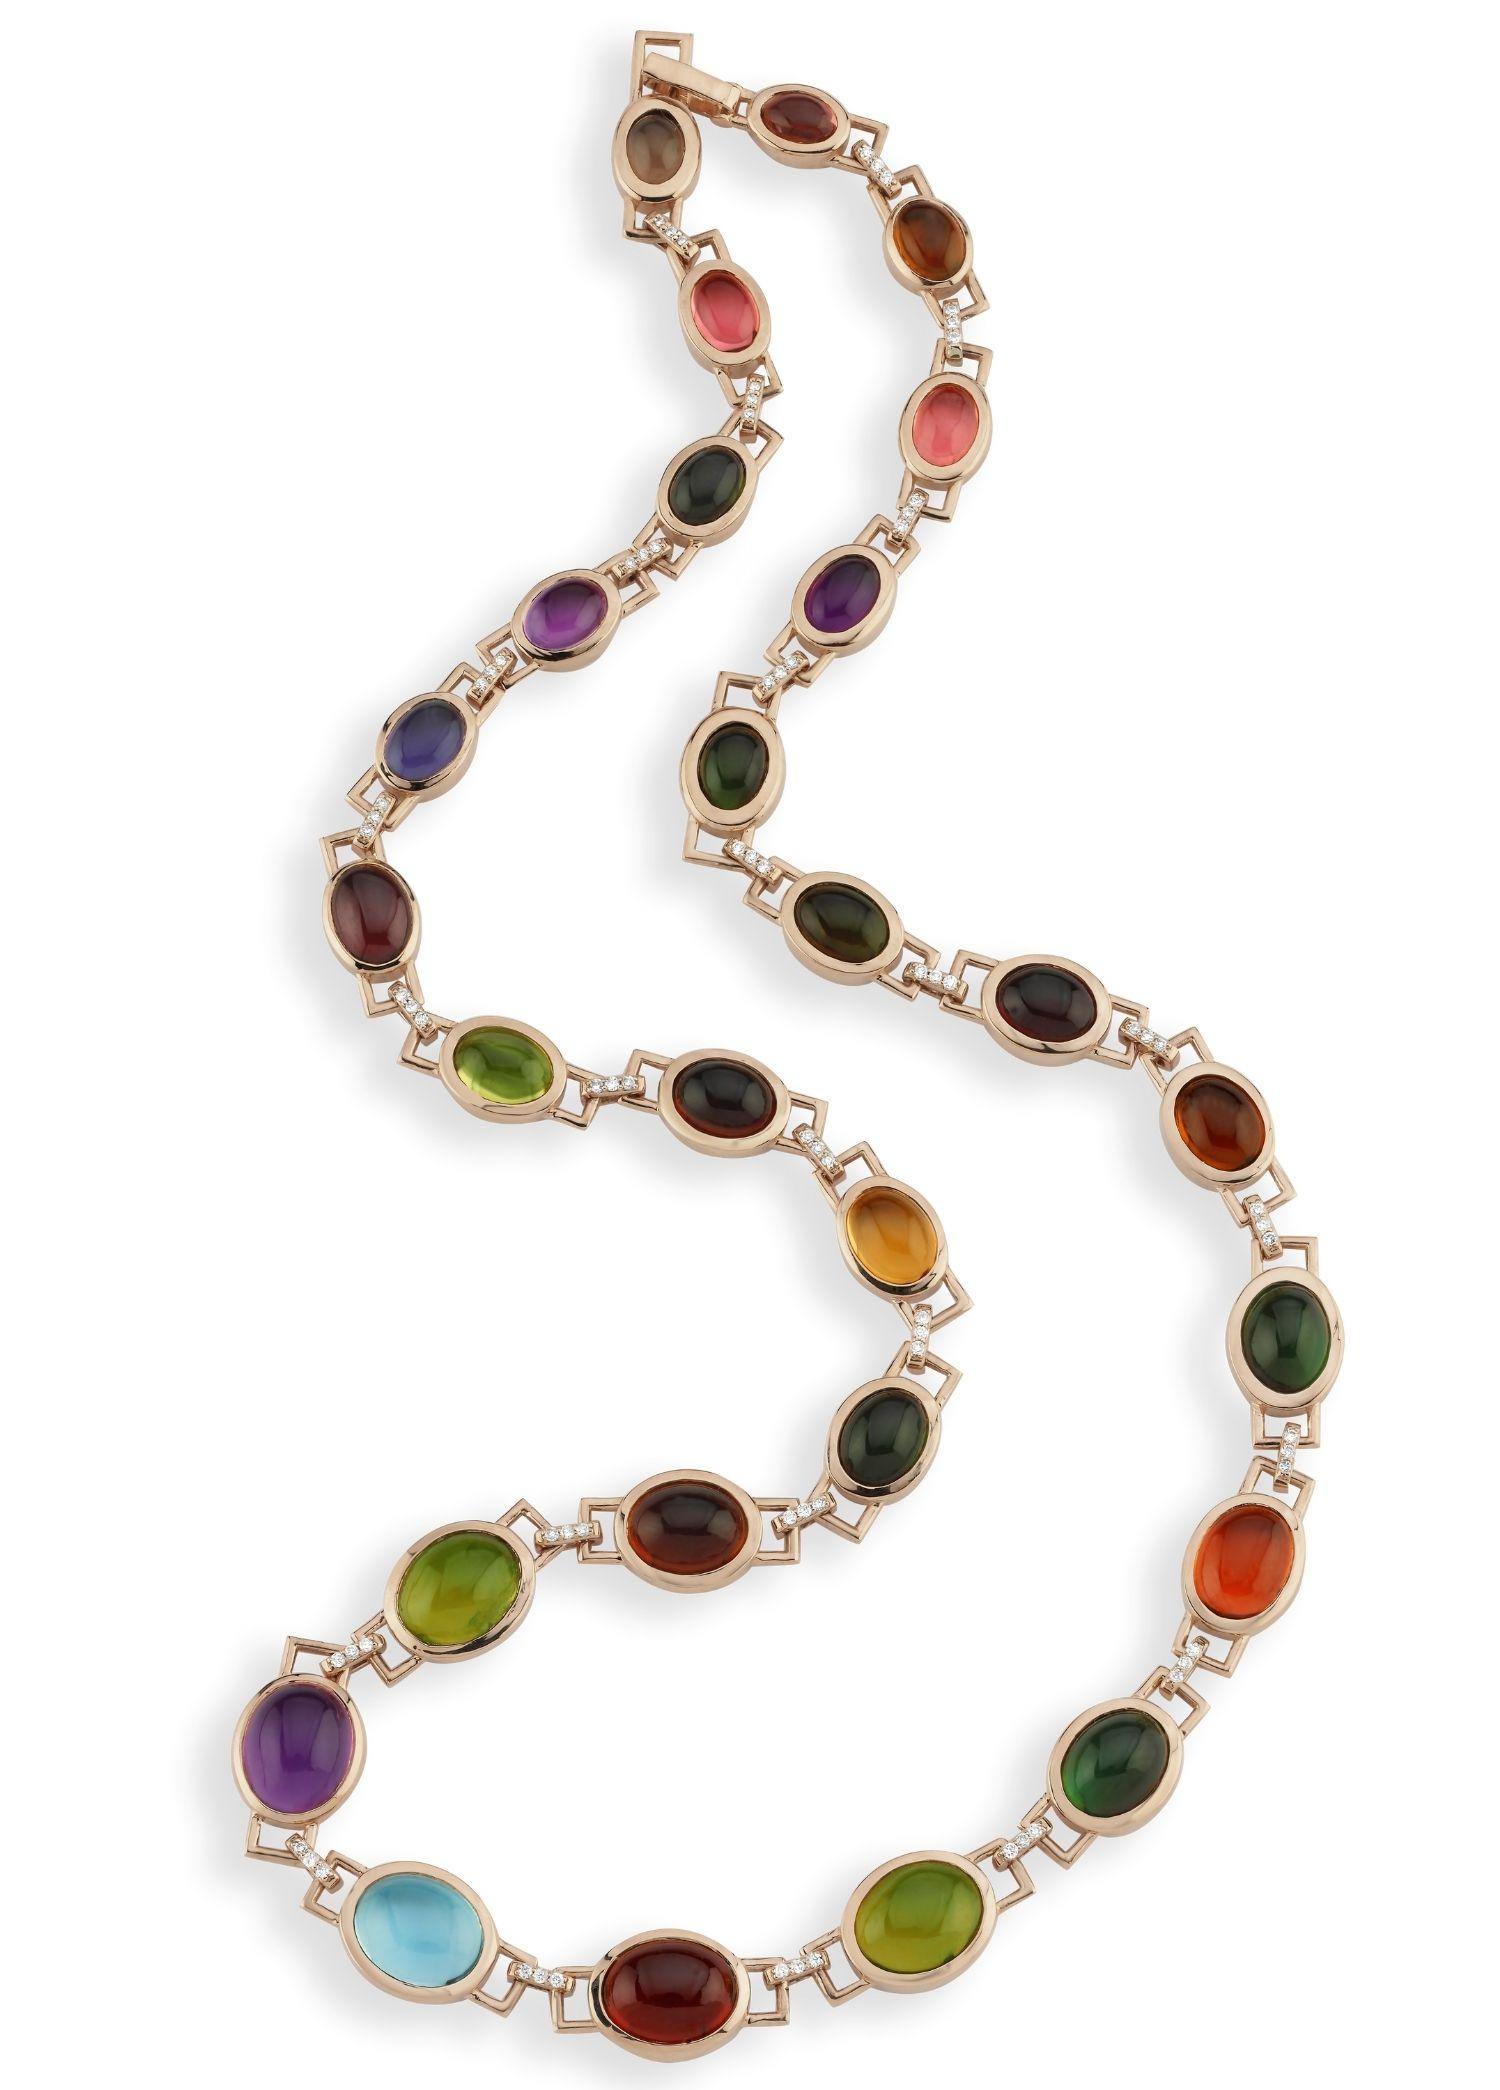 Melie Jewelry Gem Choker Necklace

18K Rose Gold, 0.42 ct White Diamond, 46.04 ct Tourmaline

The Story Behind
There is no other like the gold choker adorned with colorful gemstones and diamonds from Melie Jewelry's 